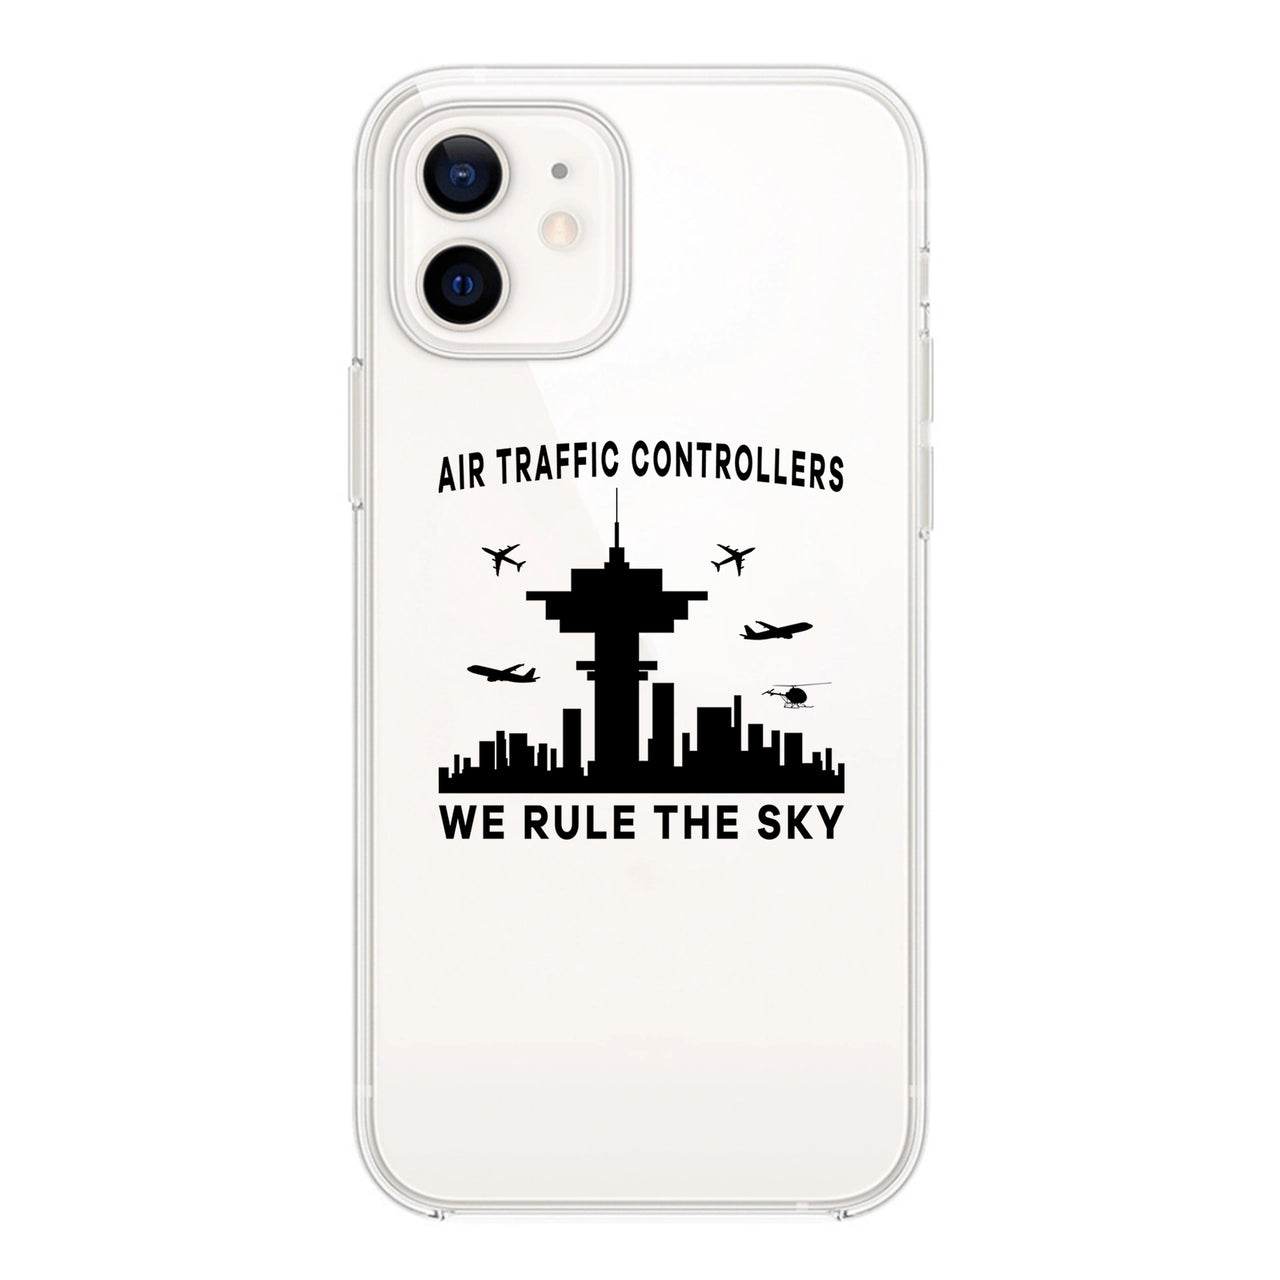 Air Traffic Controllers - We Rule The Sky Designed Transparent Silicone iPhone Cases